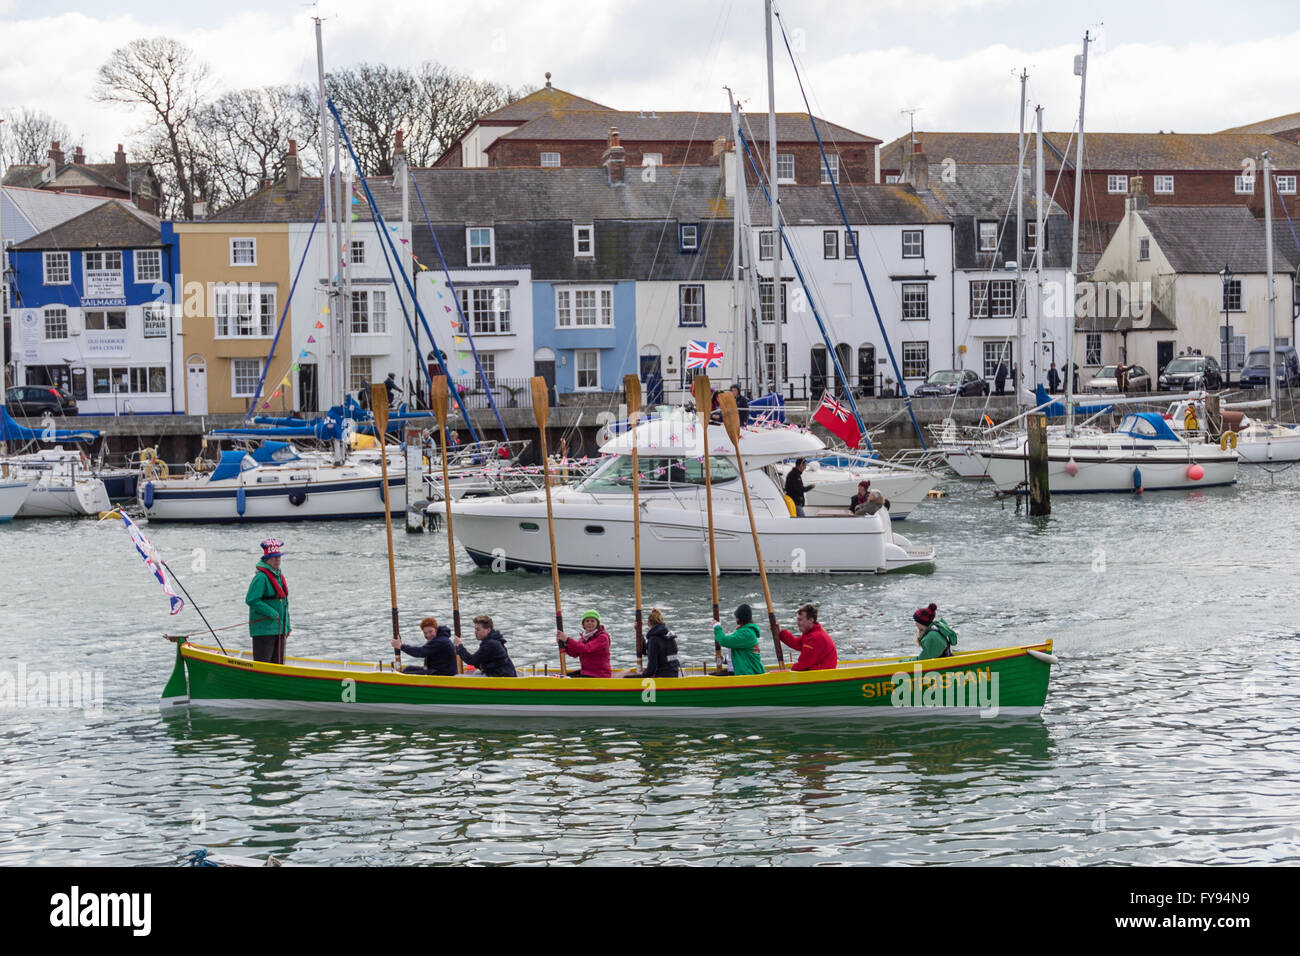 Weymouth, England. 23 April 2016. Queen's 90th Birthday Floating Tribute. Sir Tristan, rowers saluting. Credit:  Frances Underwood/Alamy Live News Stock Photo